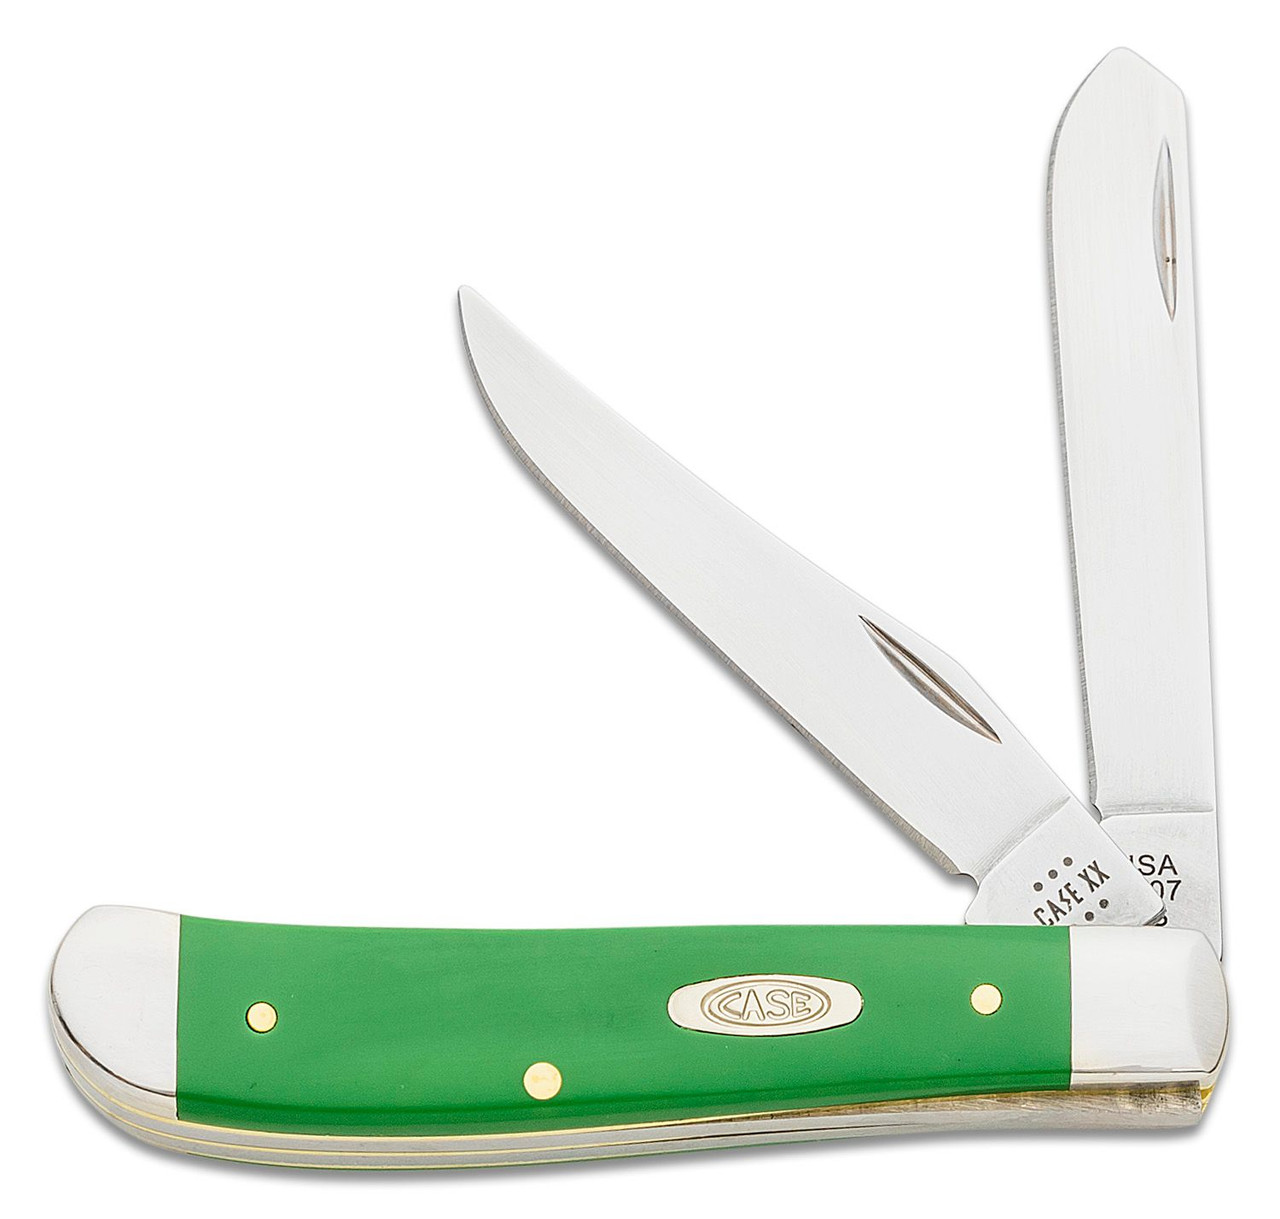 Case Mini Trapper 53392 Smooth Green Synthetic (4207 SS)